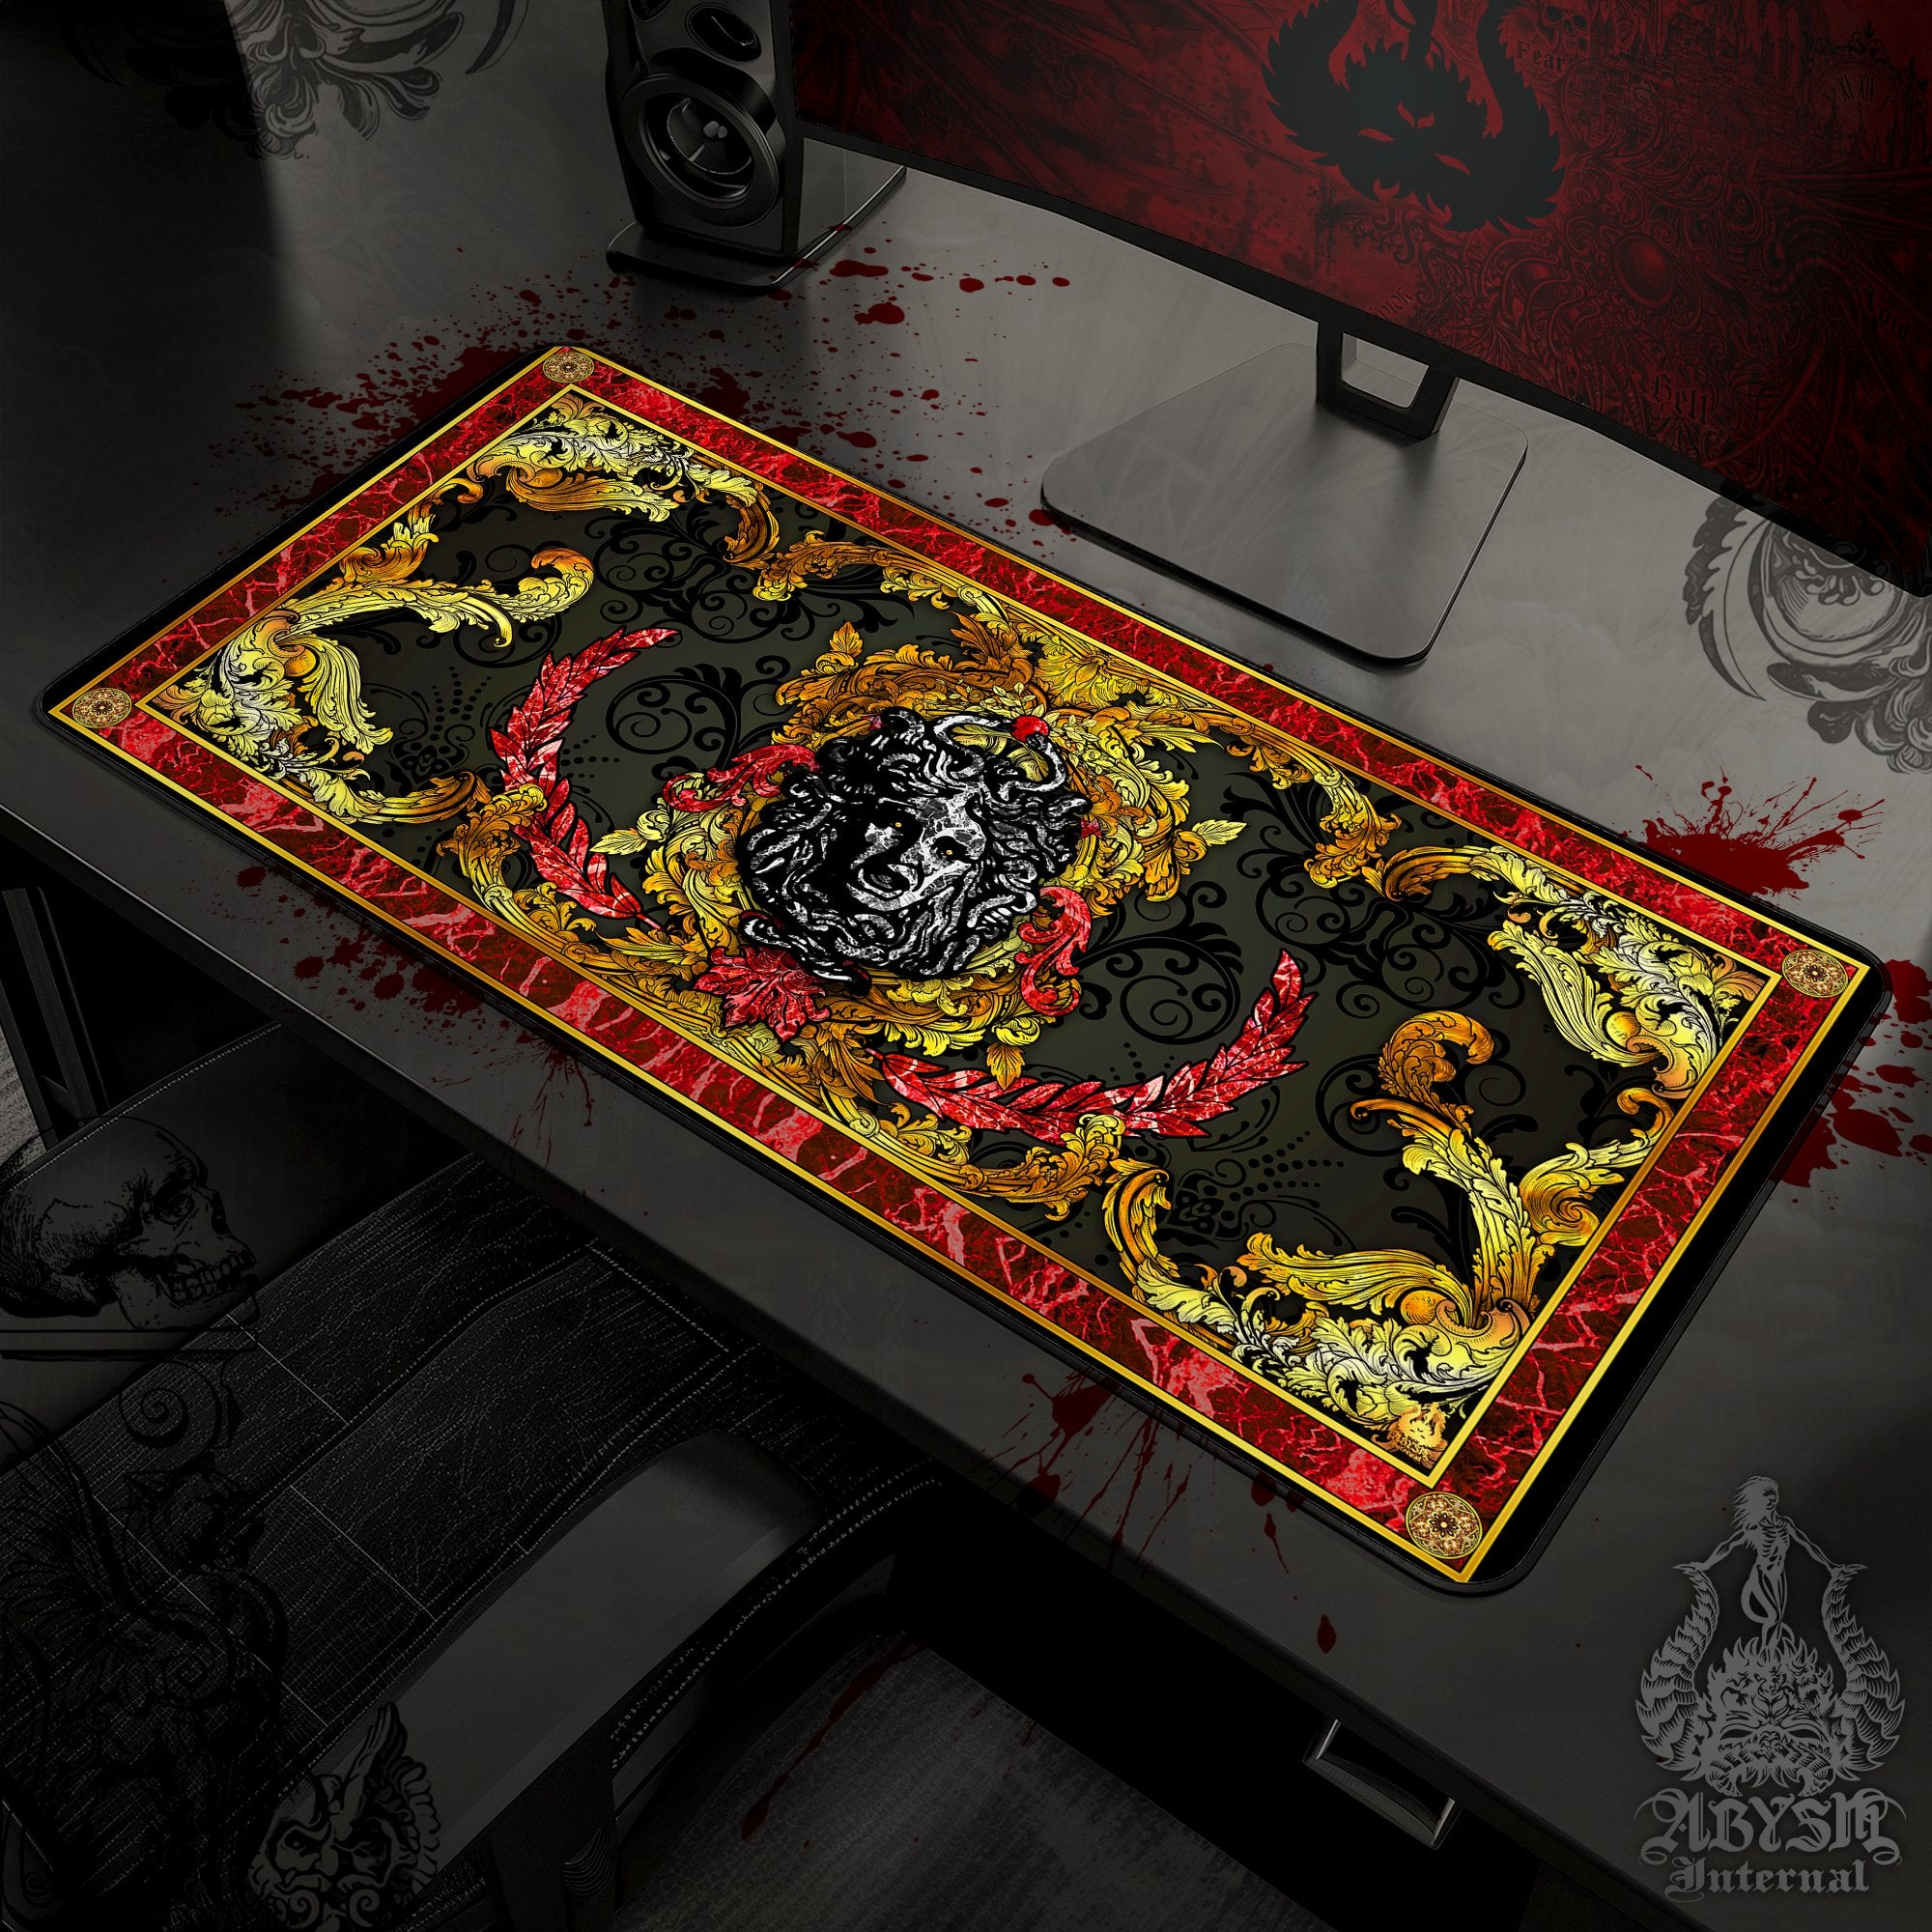 Medusa Mouse Pad, Ornamented Gaming Desk Mat, Baroque Workpad, Vintage Table Protector Cover, Art Print - Abysm Internal